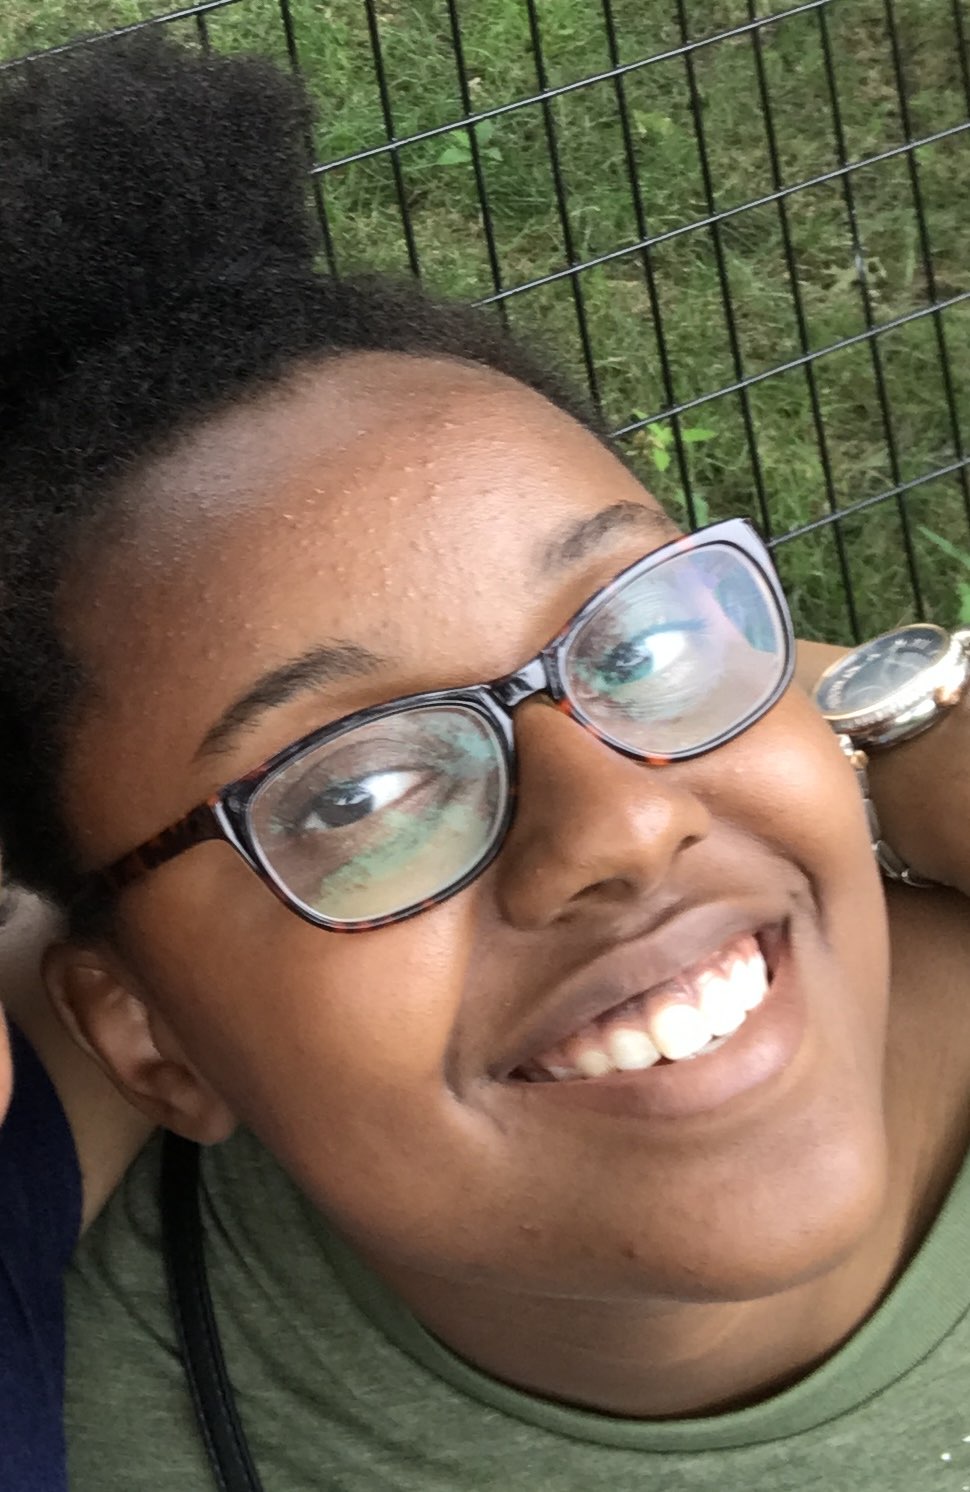 The face of a young, smiling, African-American woman with glasses.